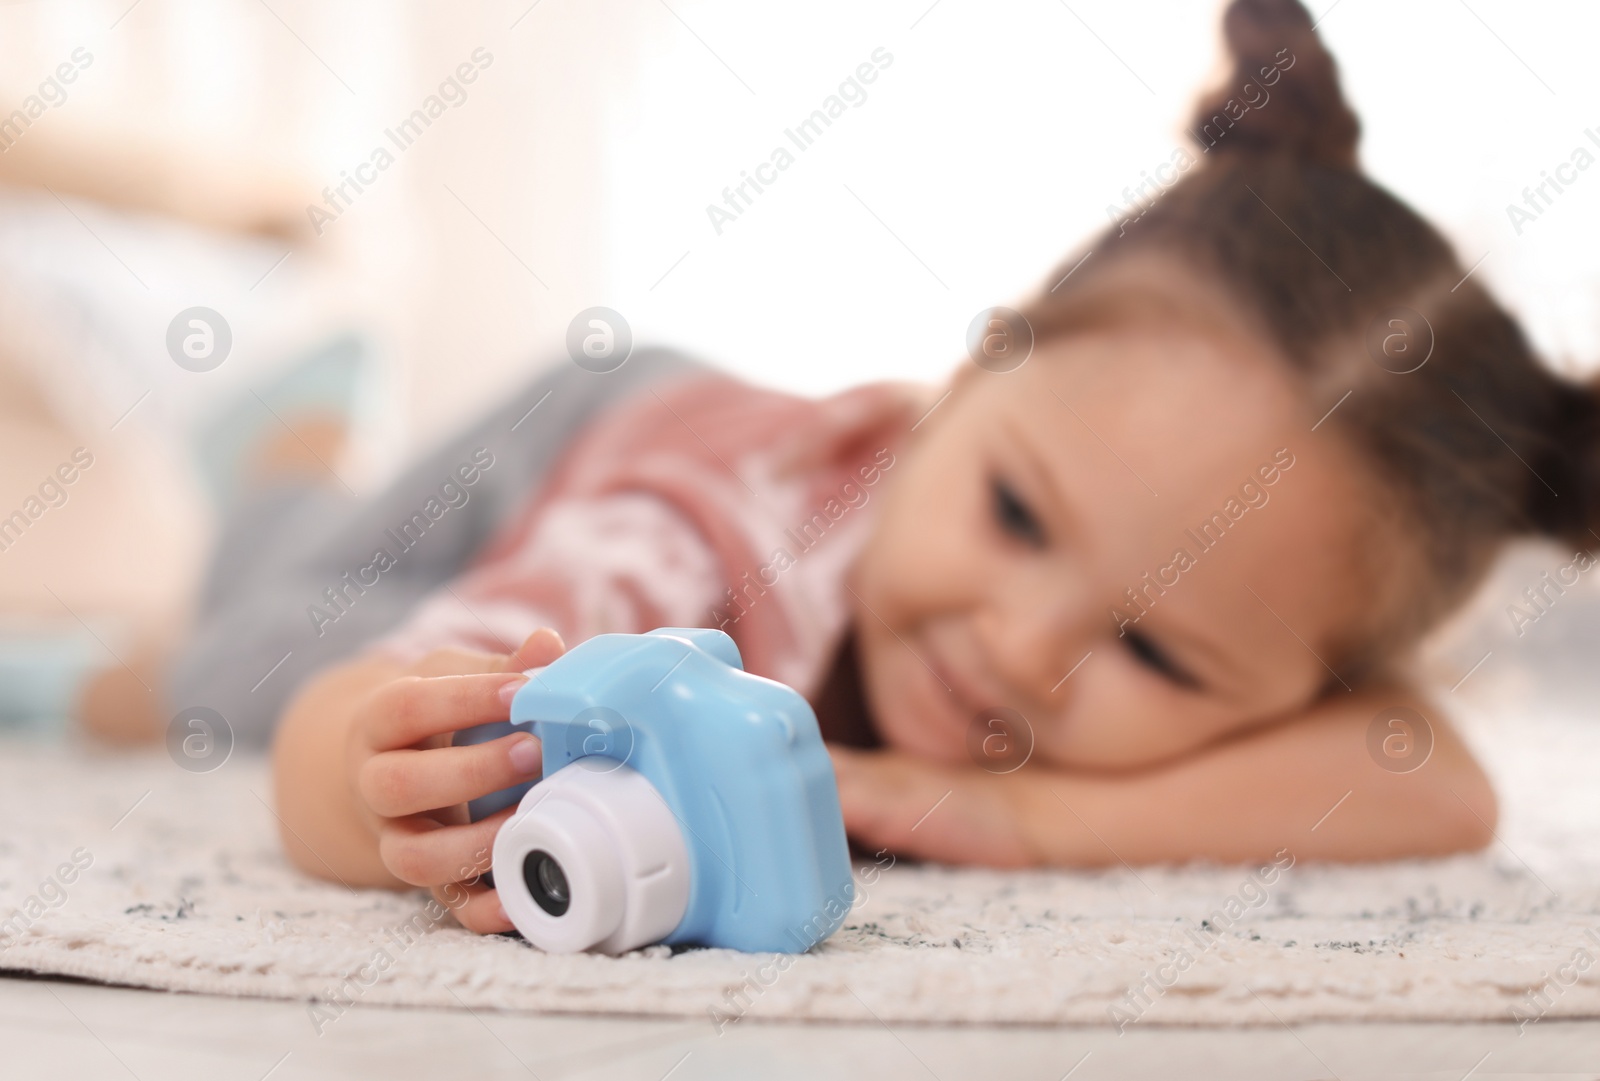 Photo of Little photographer indoors, focus on hand with camera